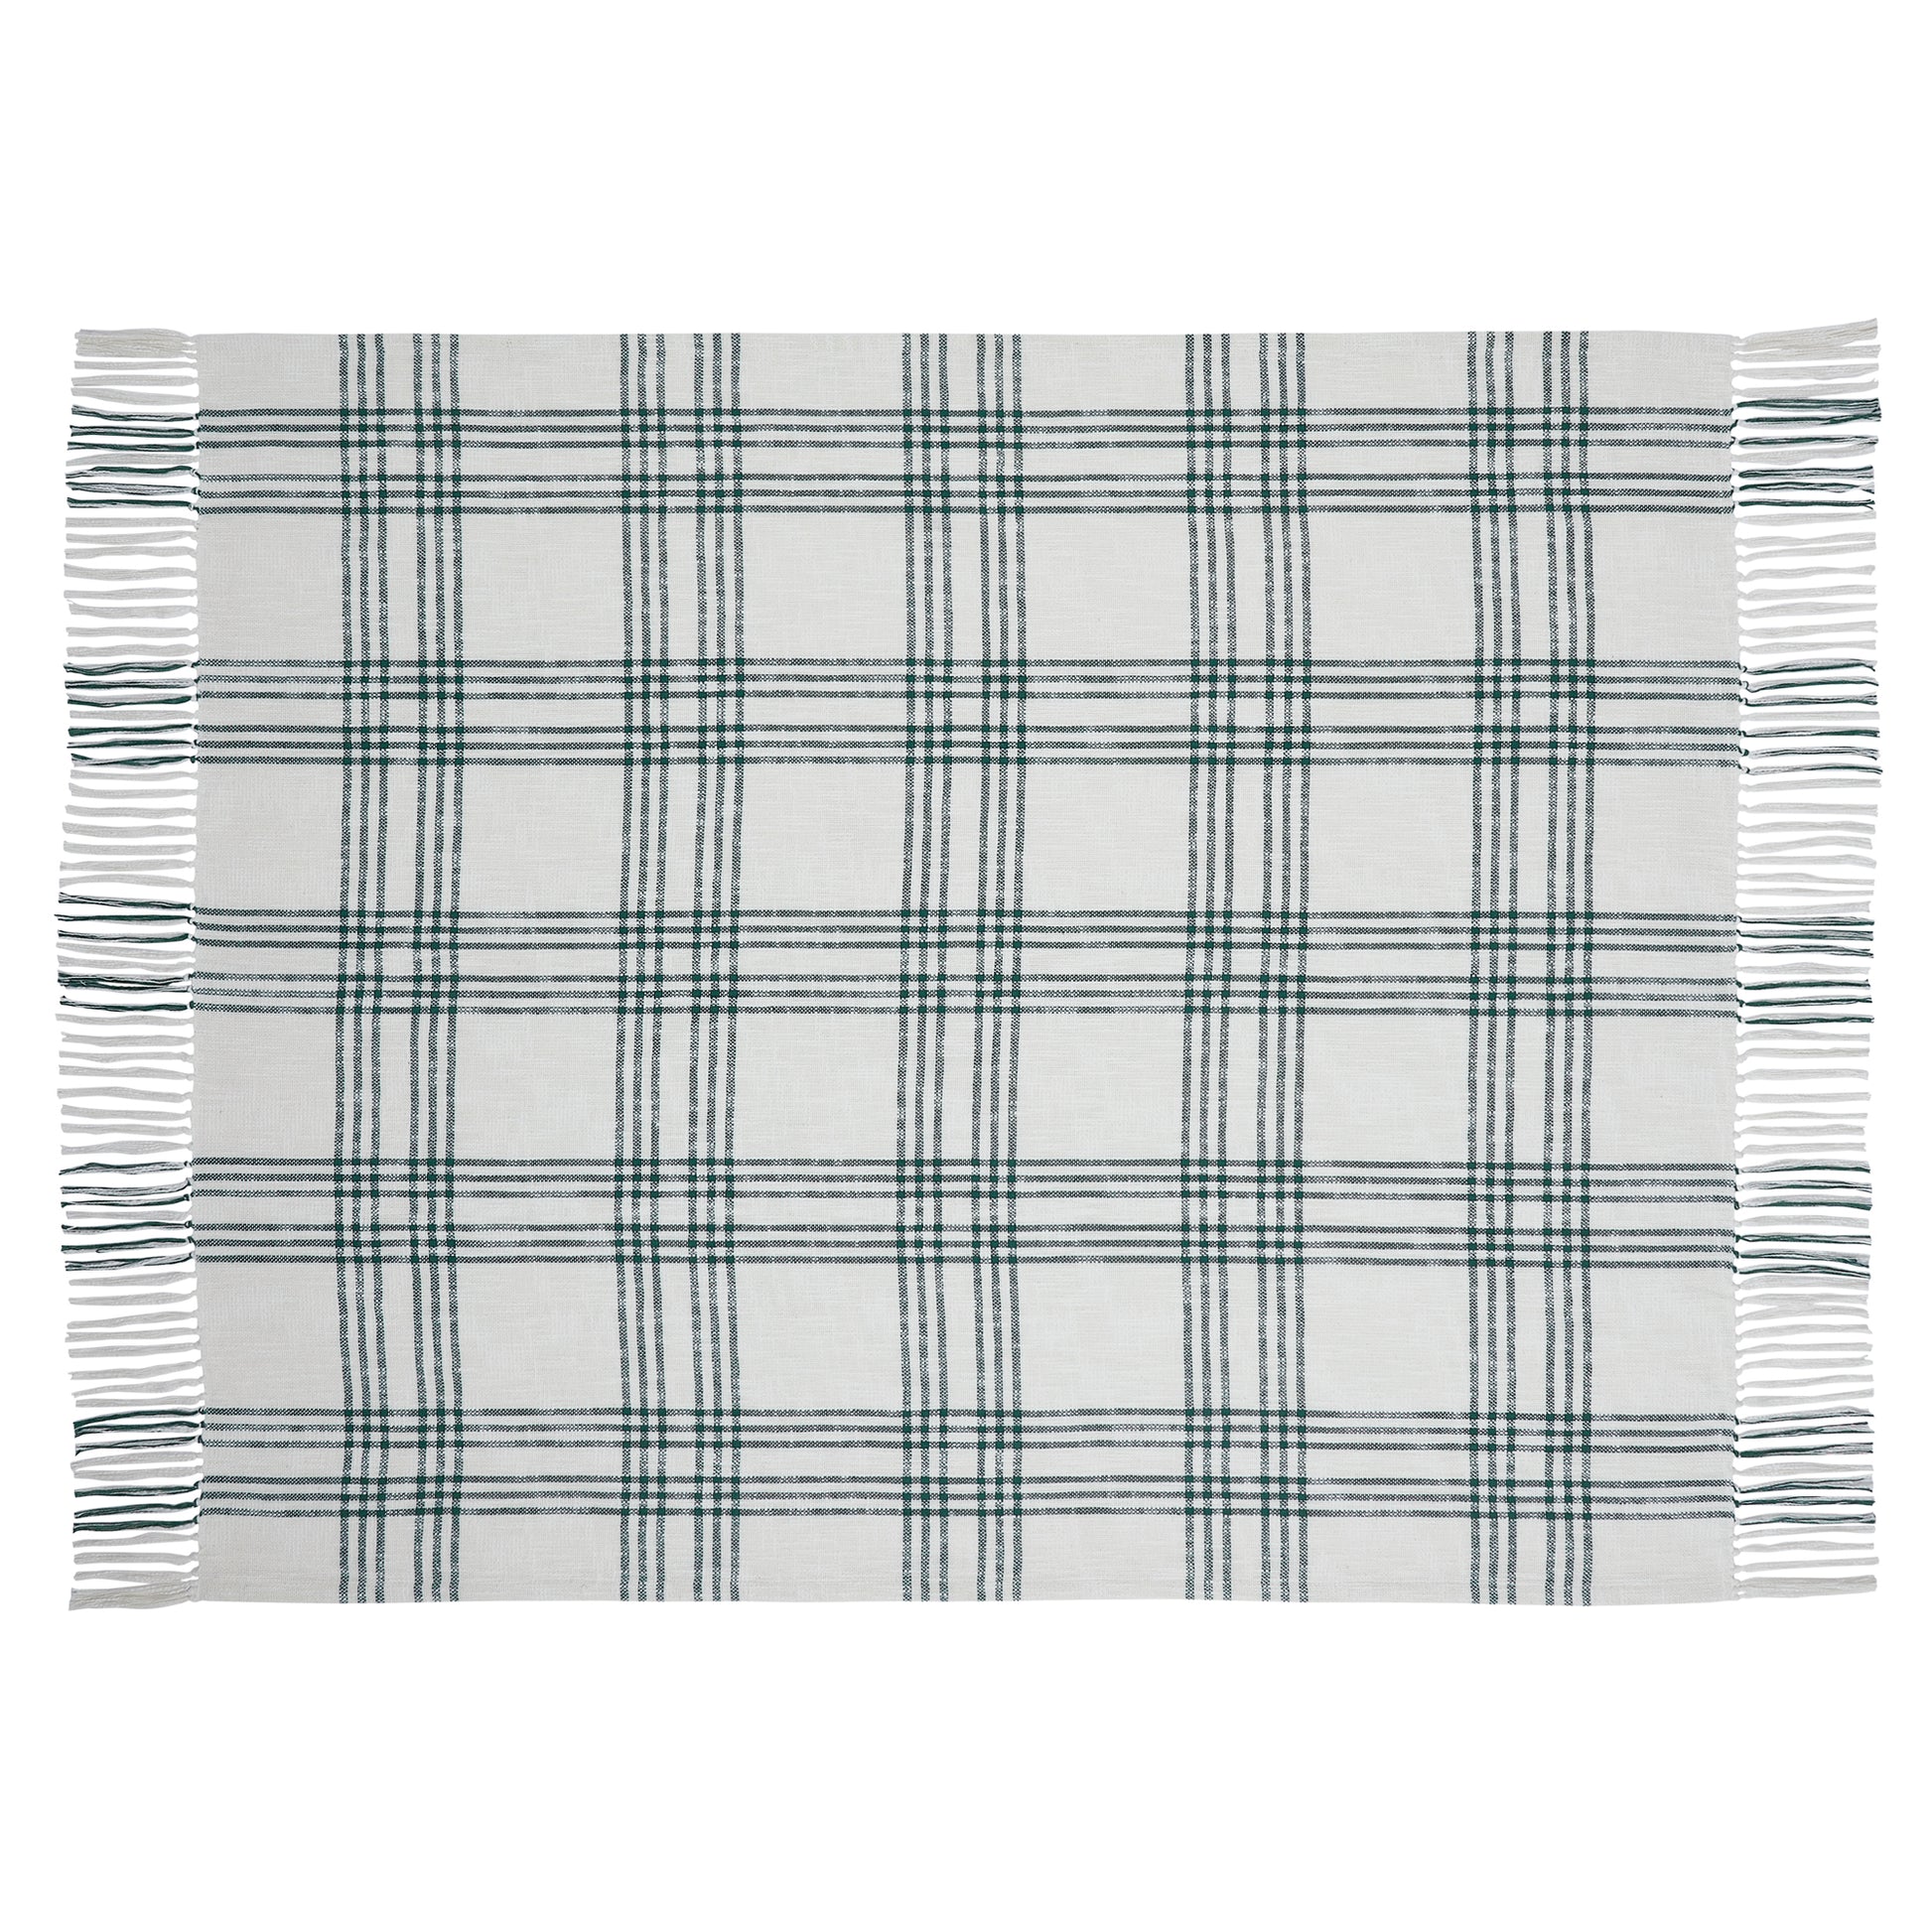 Pine Plaid Woven Blanket Laid Out